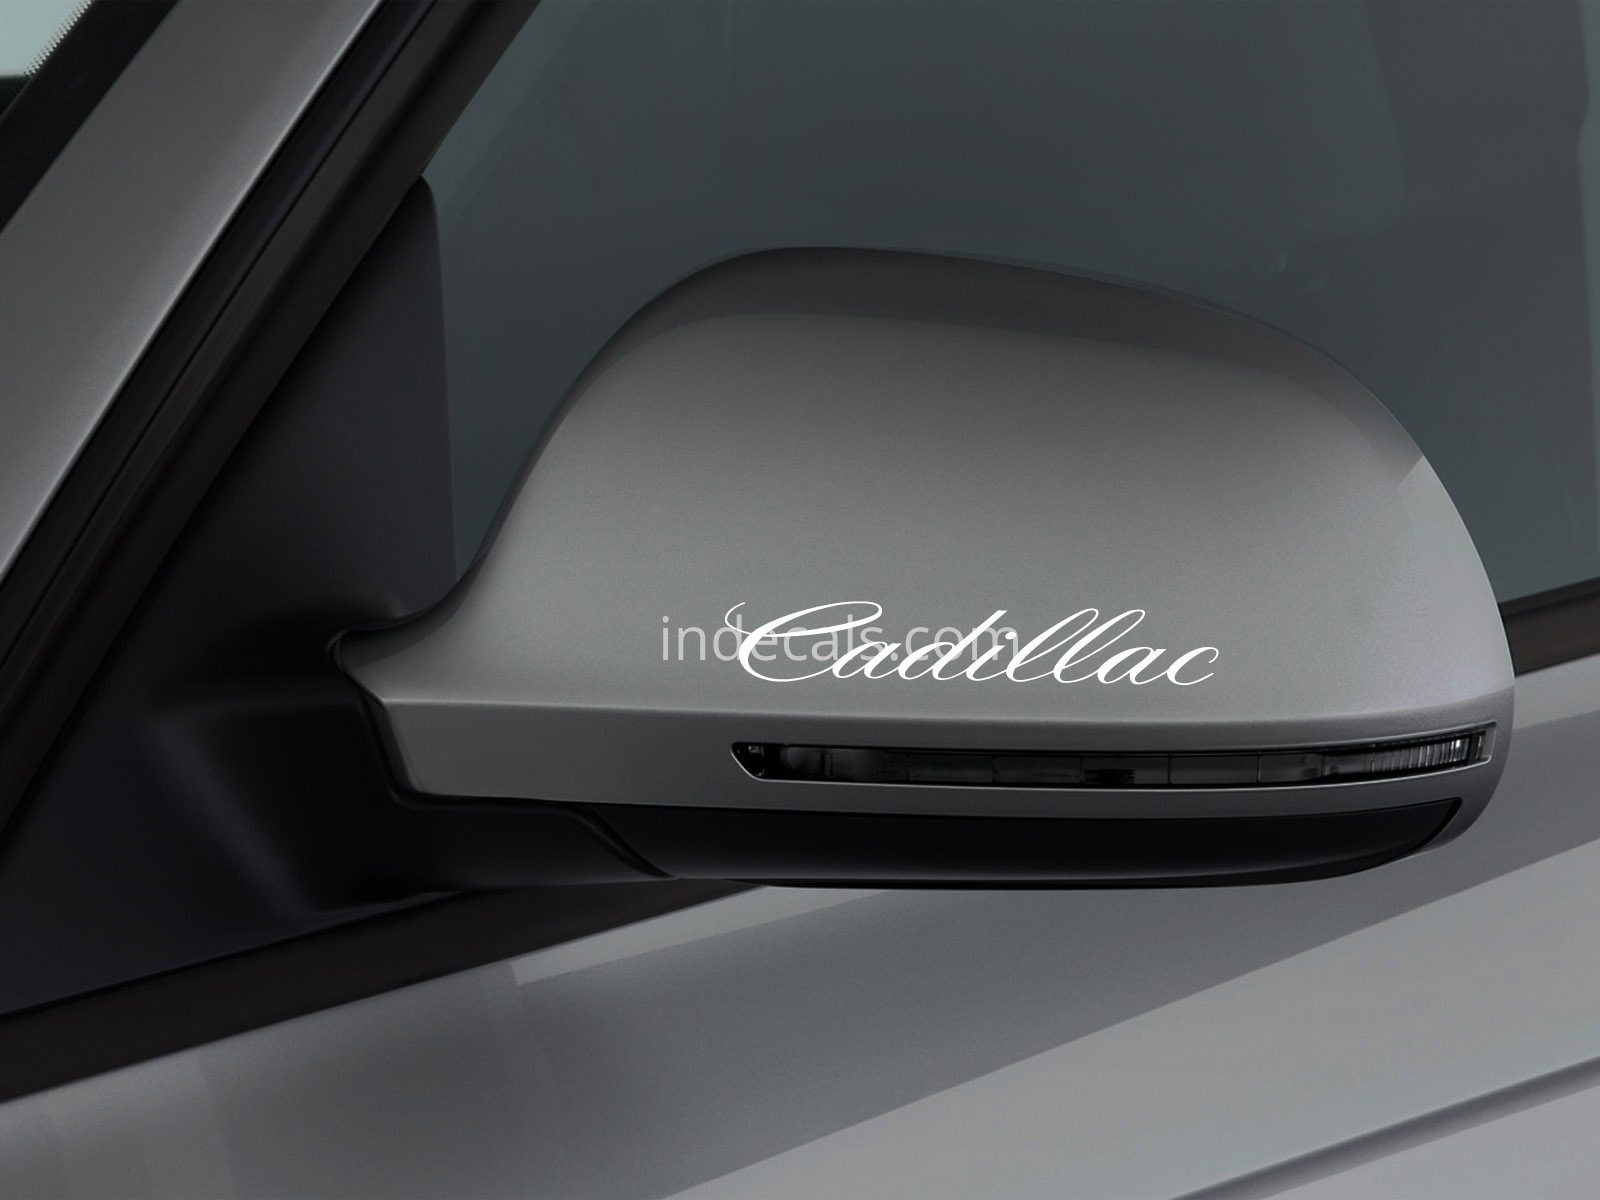 3 x Cadillac Stickers for Mirror - White